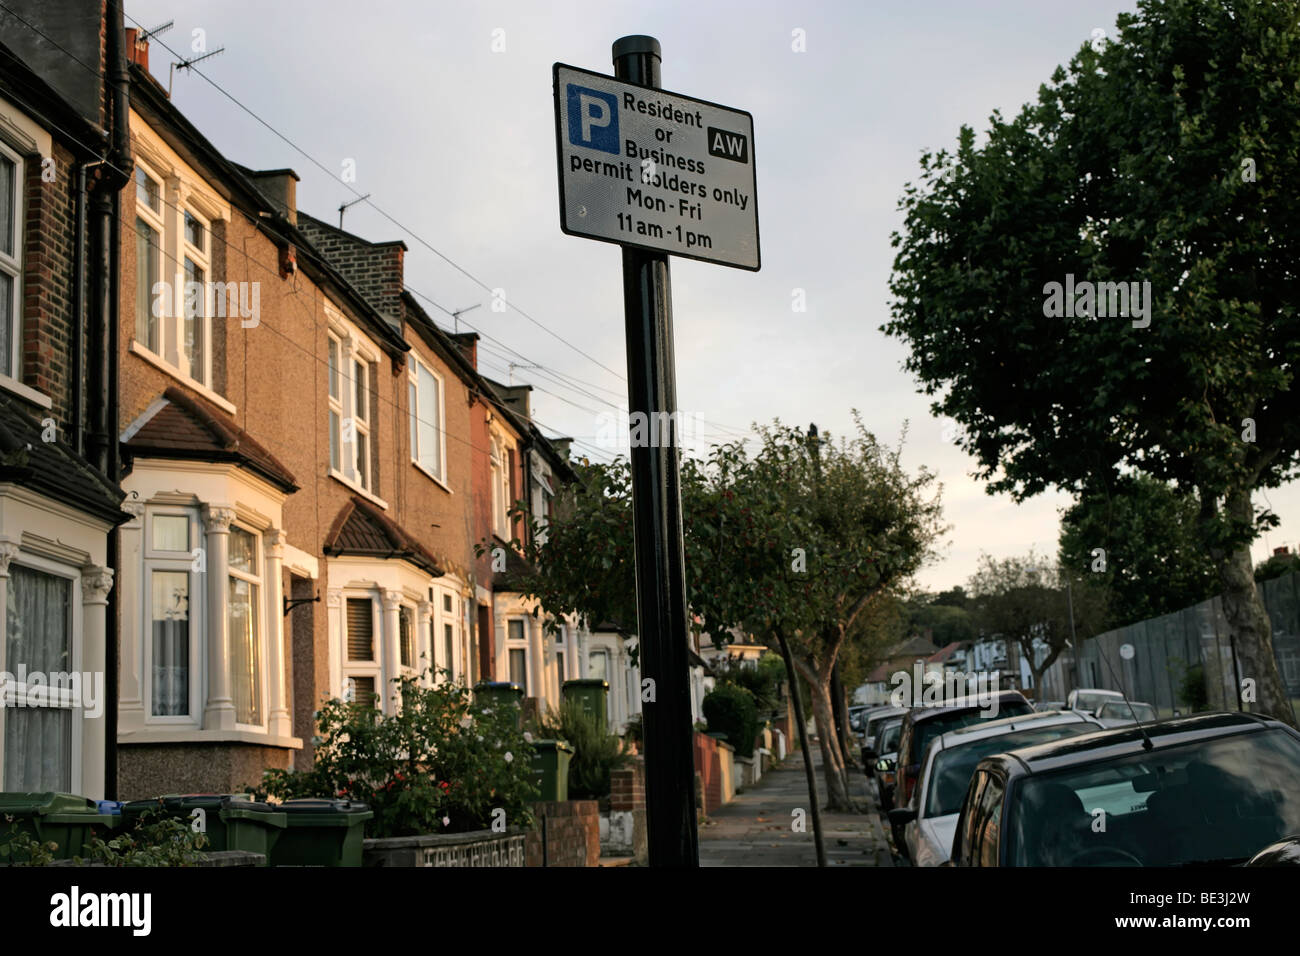 Resident permit holders parking sign in residential street in Abbeywood, southeast London, UK Stock Photo